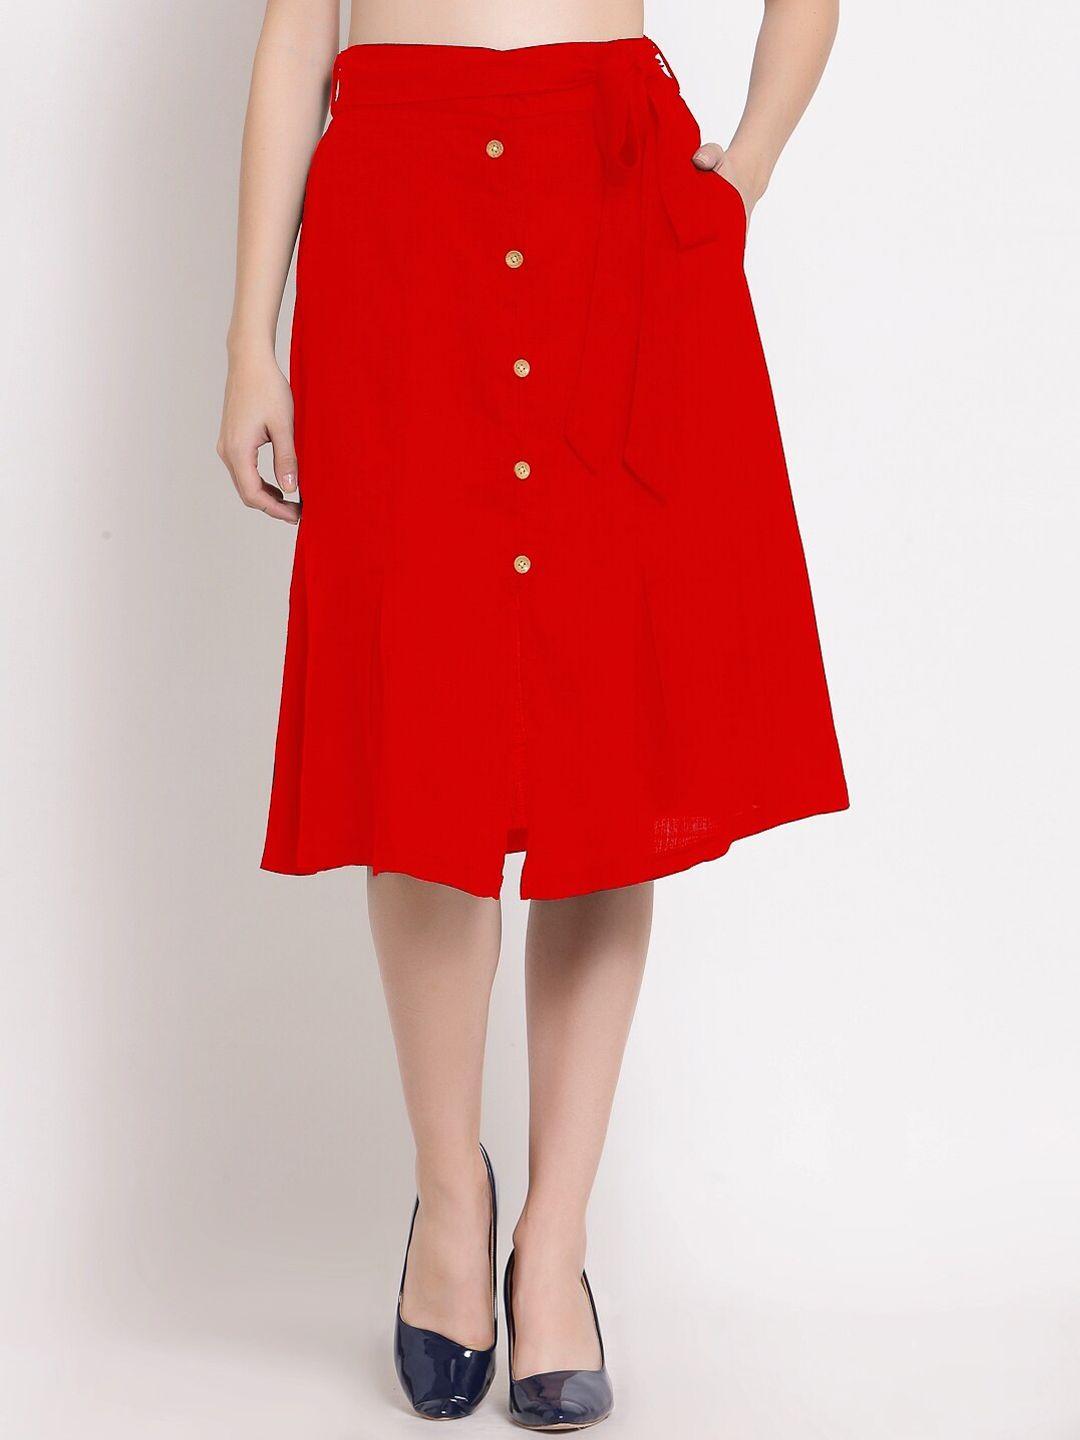 patrorna women red solid a-line skirt